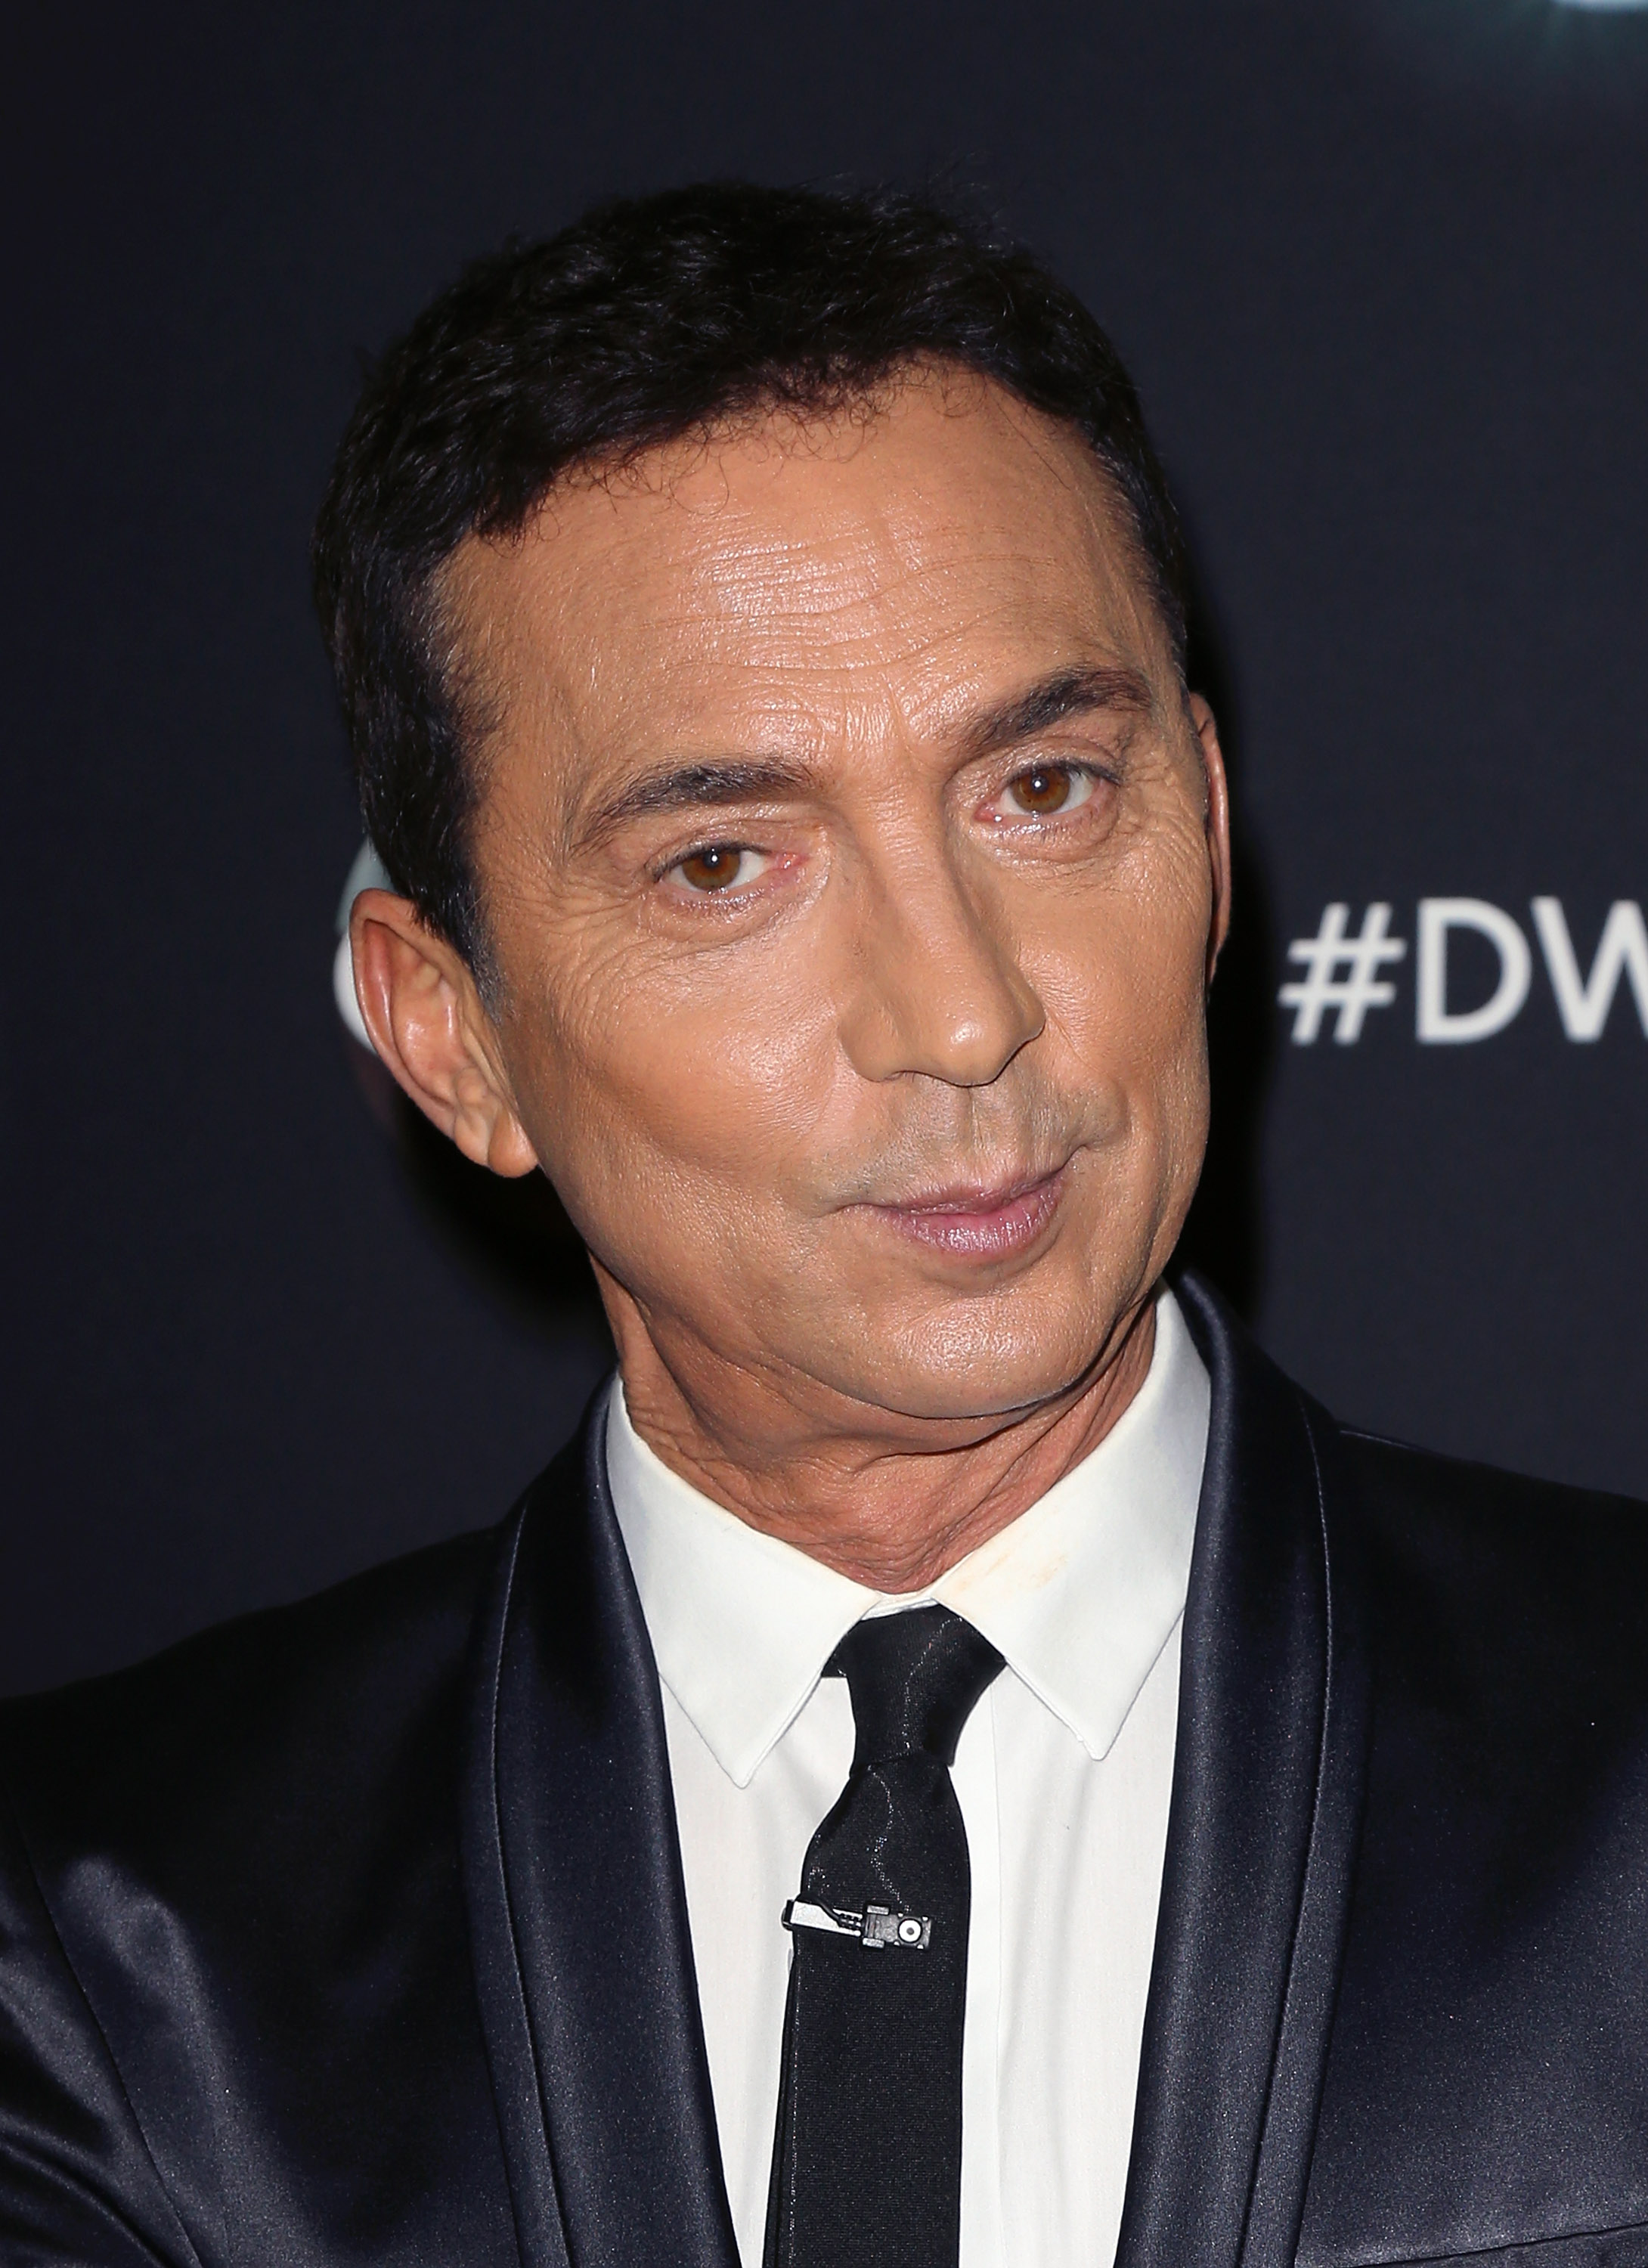 Bruno Tonioli attends "Dancing with the Stars" Season 21 at CBS Televison City on October 26, 2015, in Los Angeles, California. | Source: Getty Images